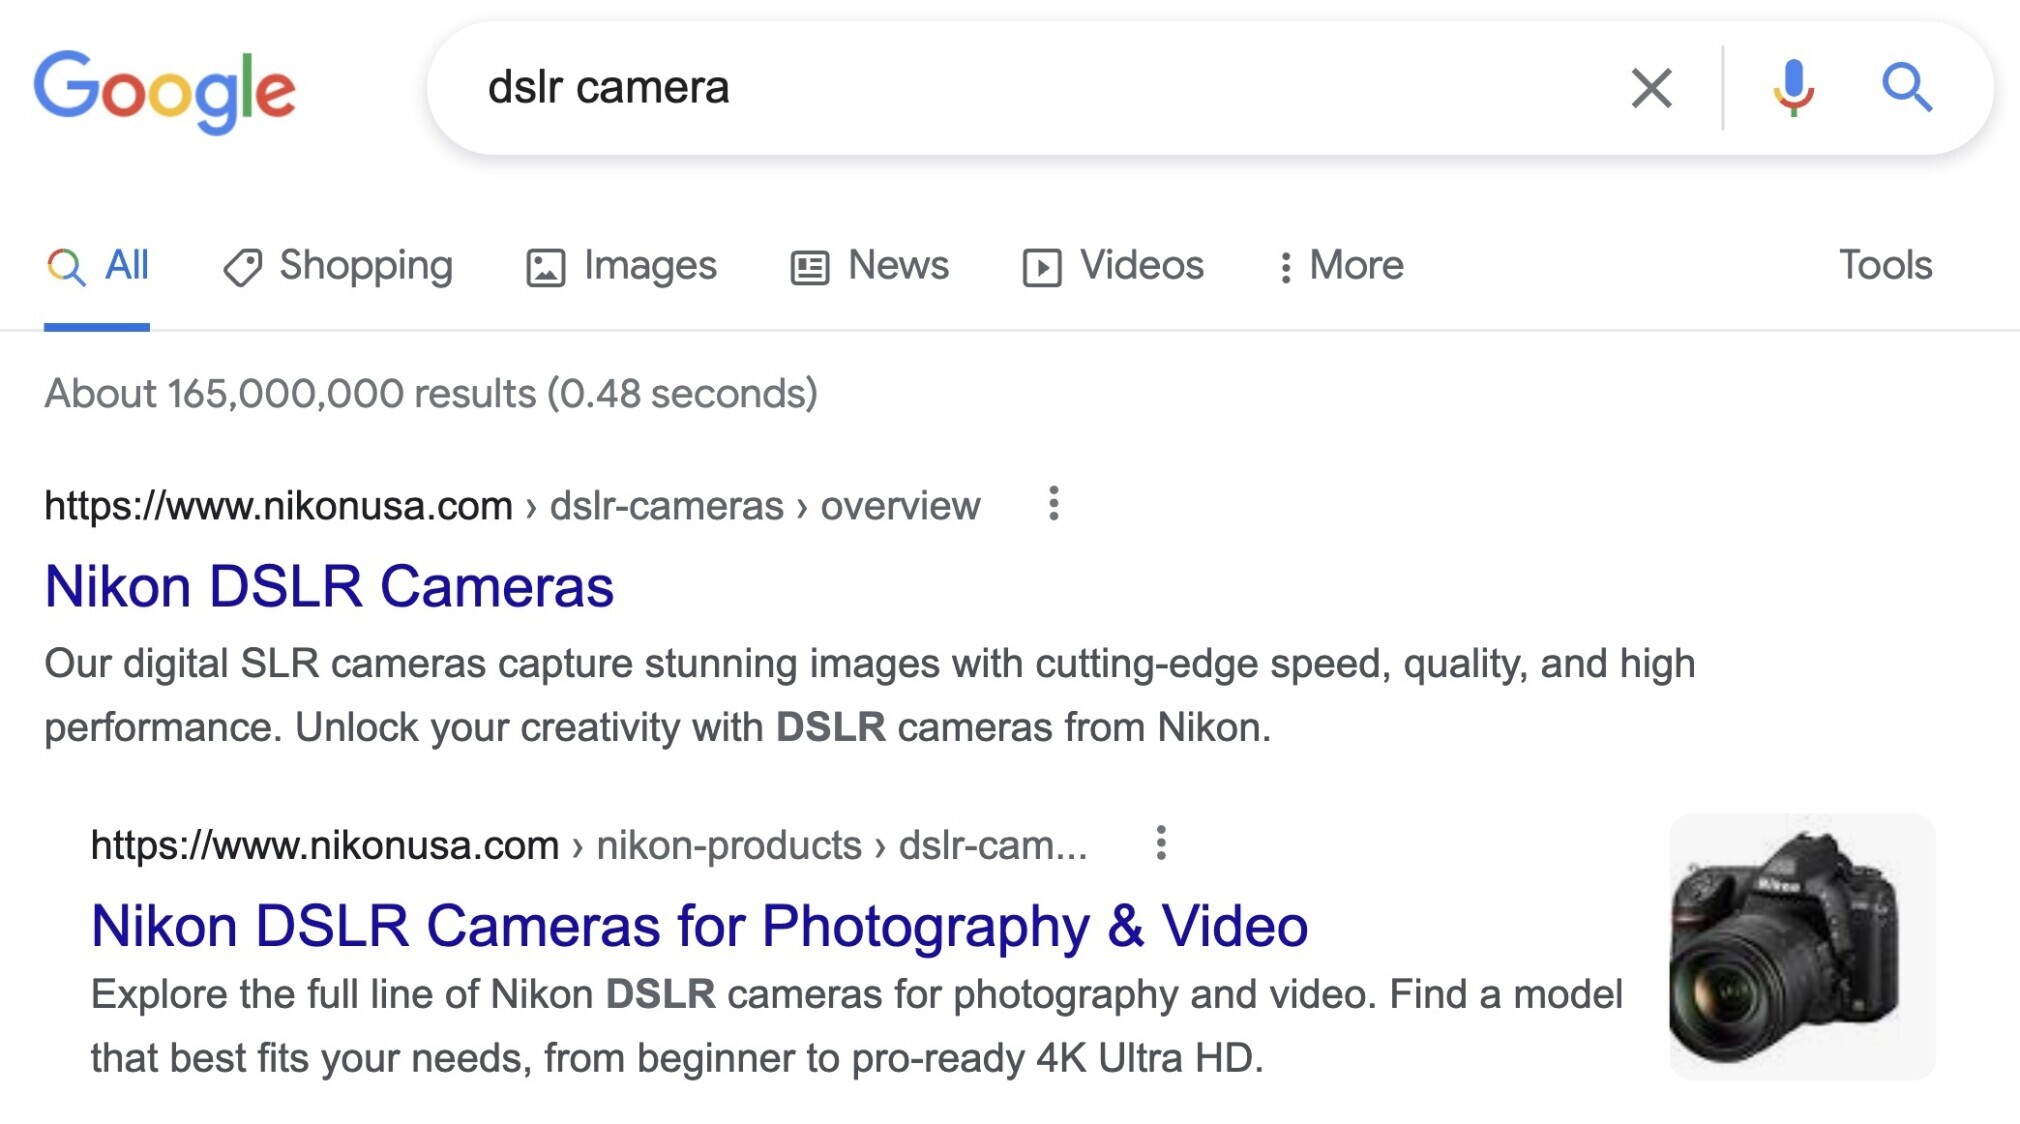 The search engine results page for the keyword "DSLR camera"